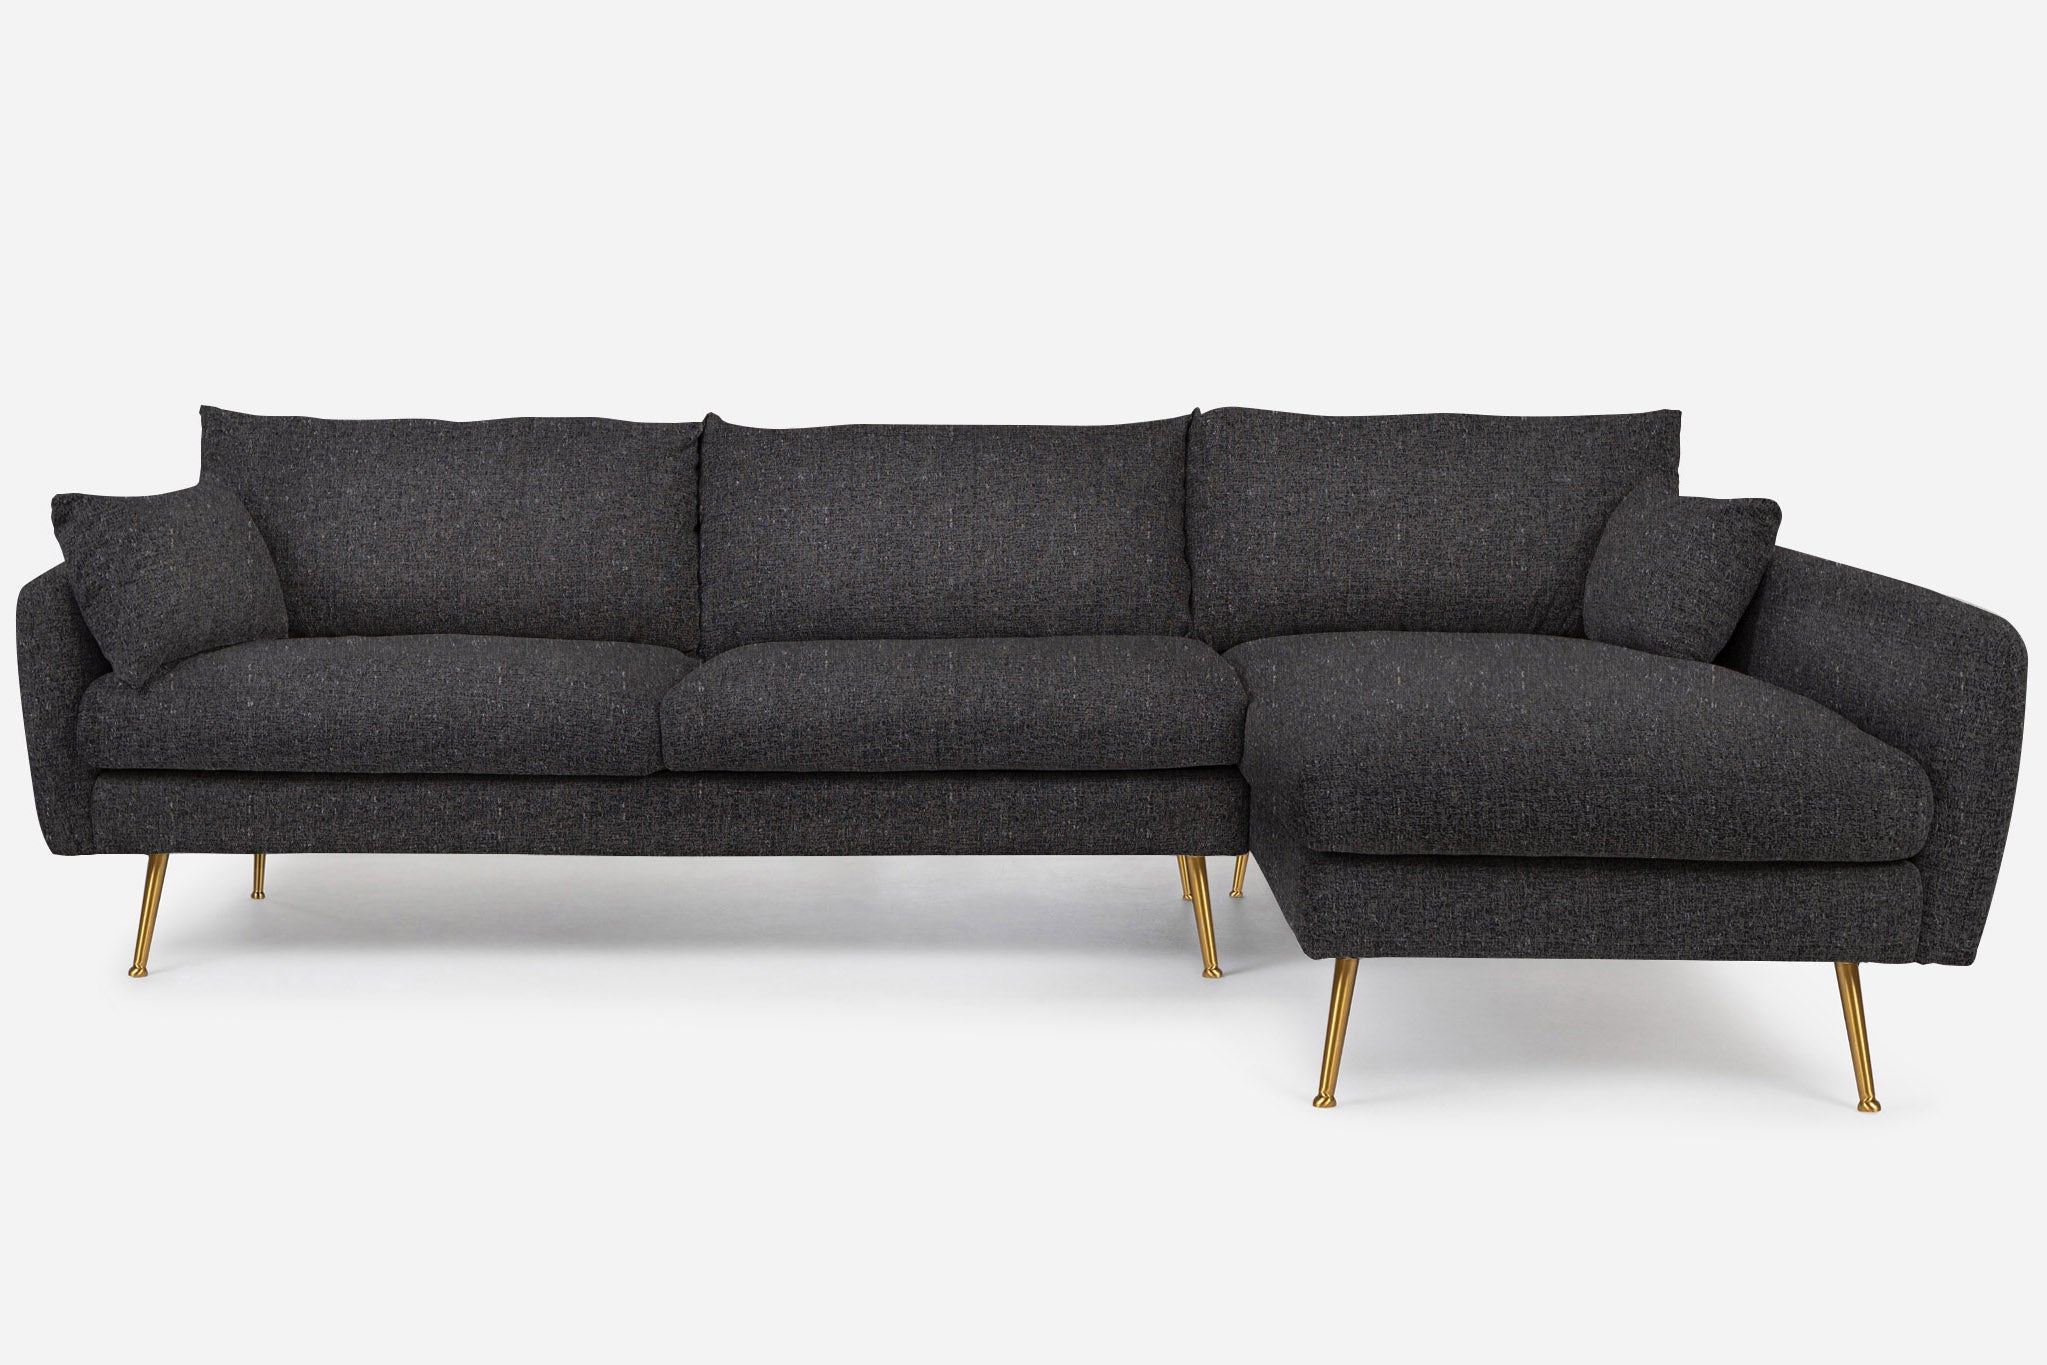 park sectional sofa shown in charcoal with gold legs right facing